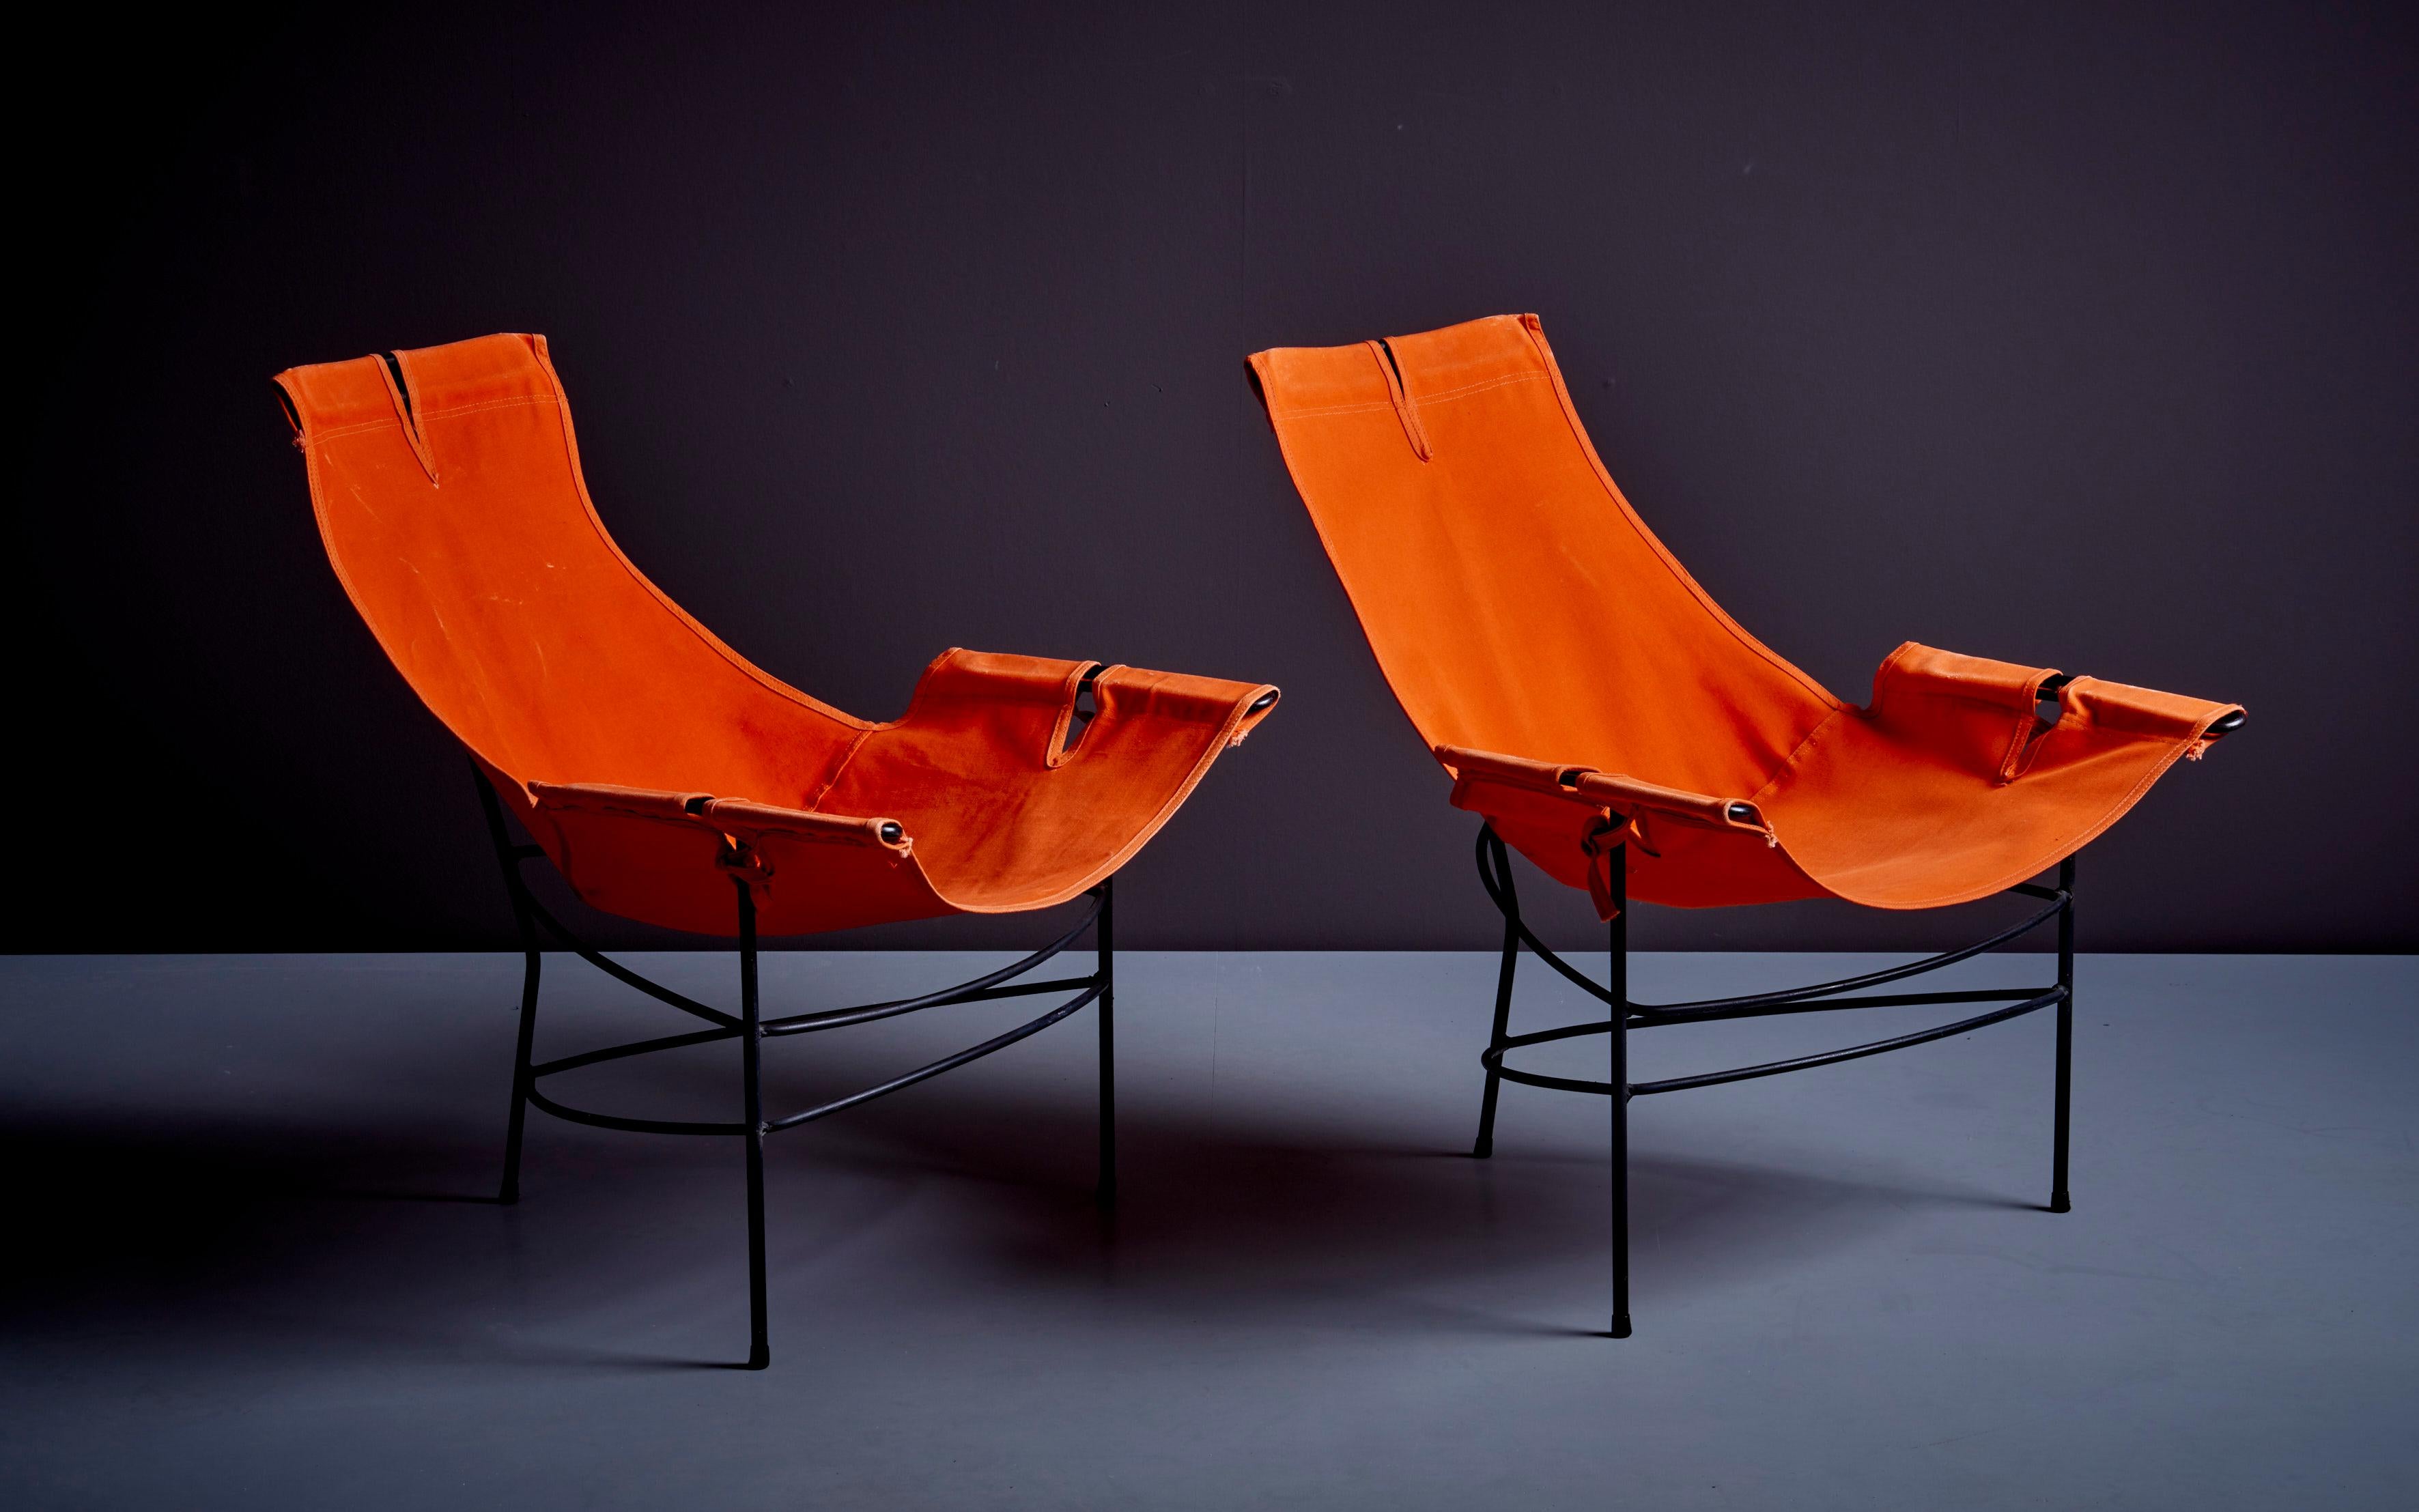 Pair of 2 Lounge Chairs by Jerry Johnson in Orange Canvas, USA, 1950s For Sale 2